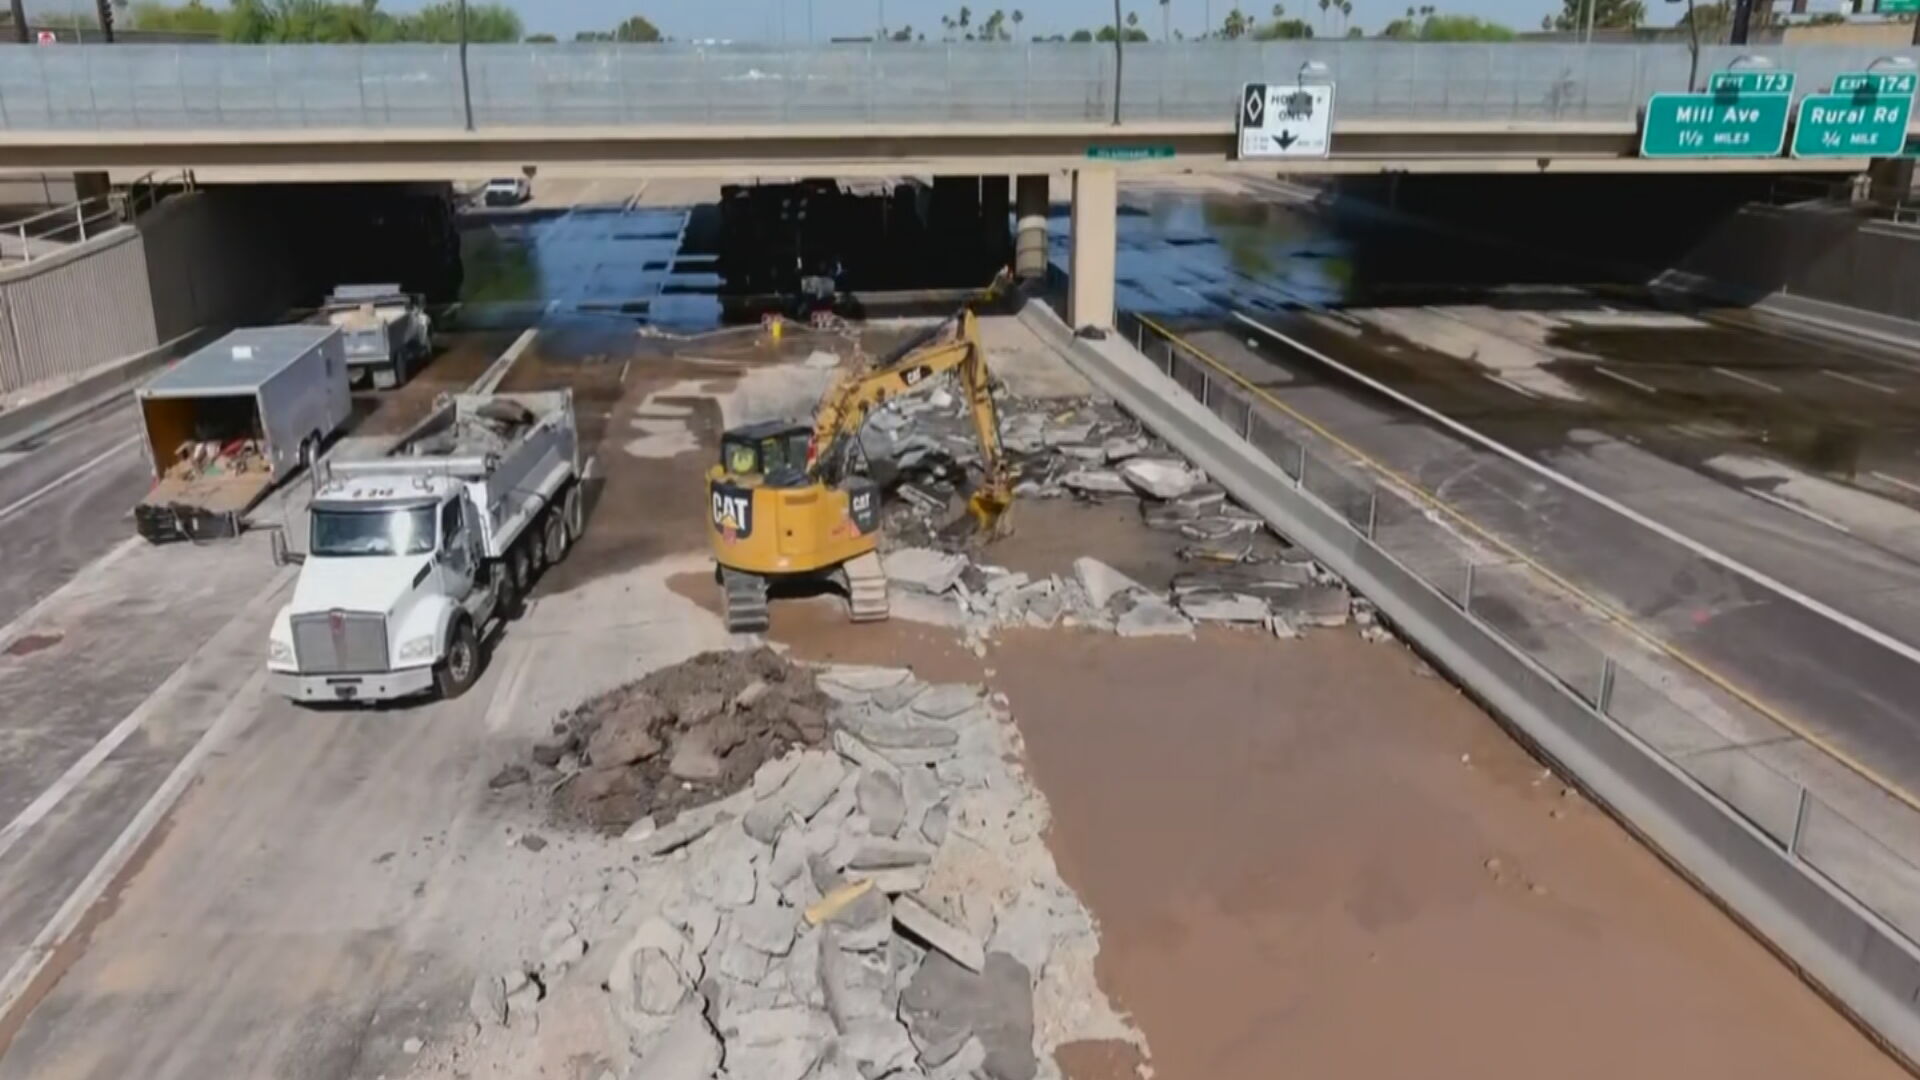 Water main break reported on Tucson's east side, Local